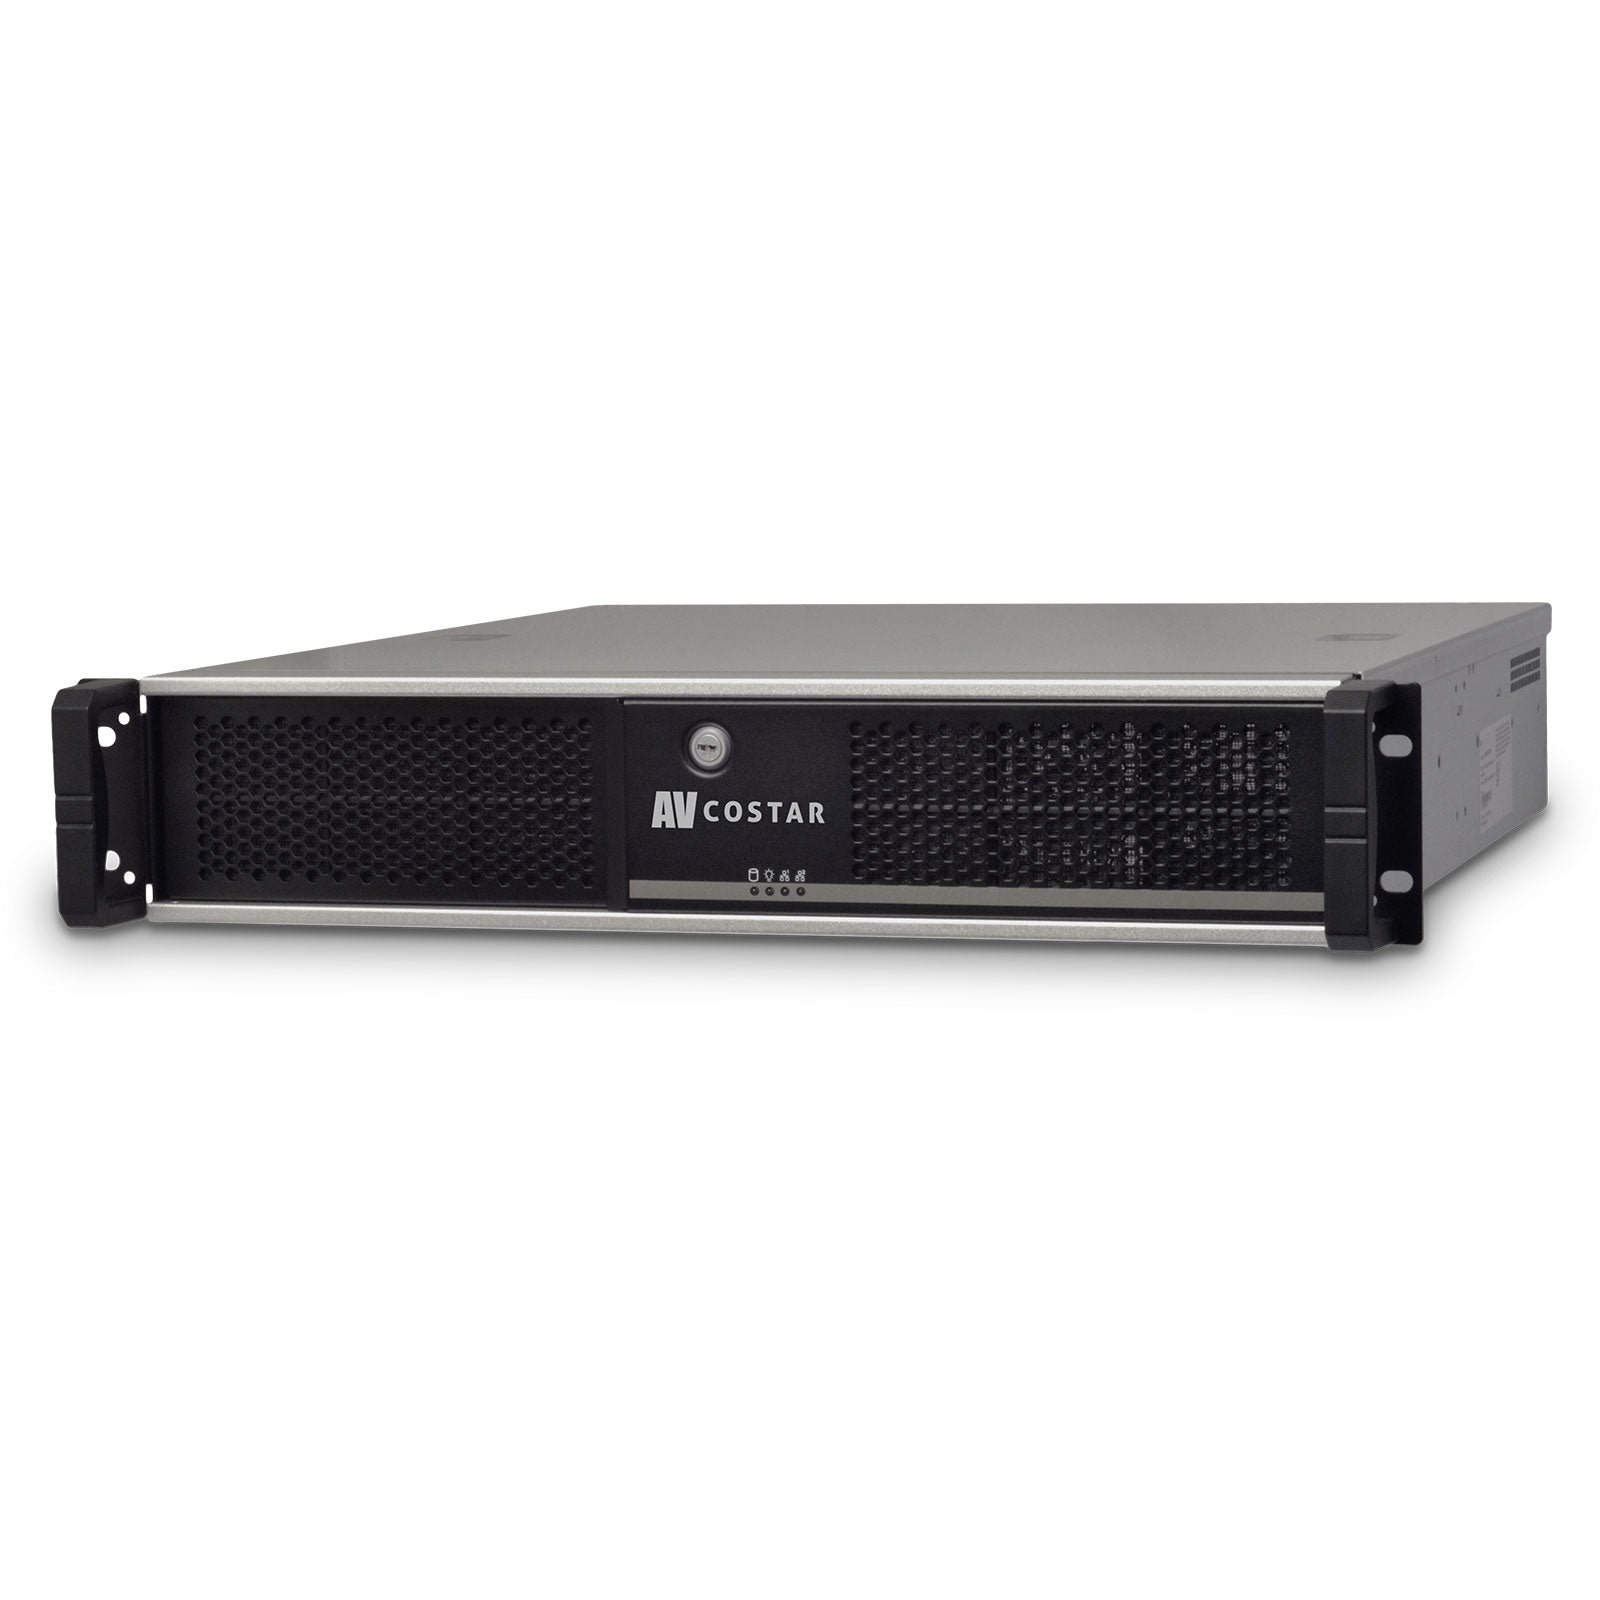 Arecont Vision AV-CSCX24T 2U Compact Server, Linux, 24TB, Removable HDD Bay